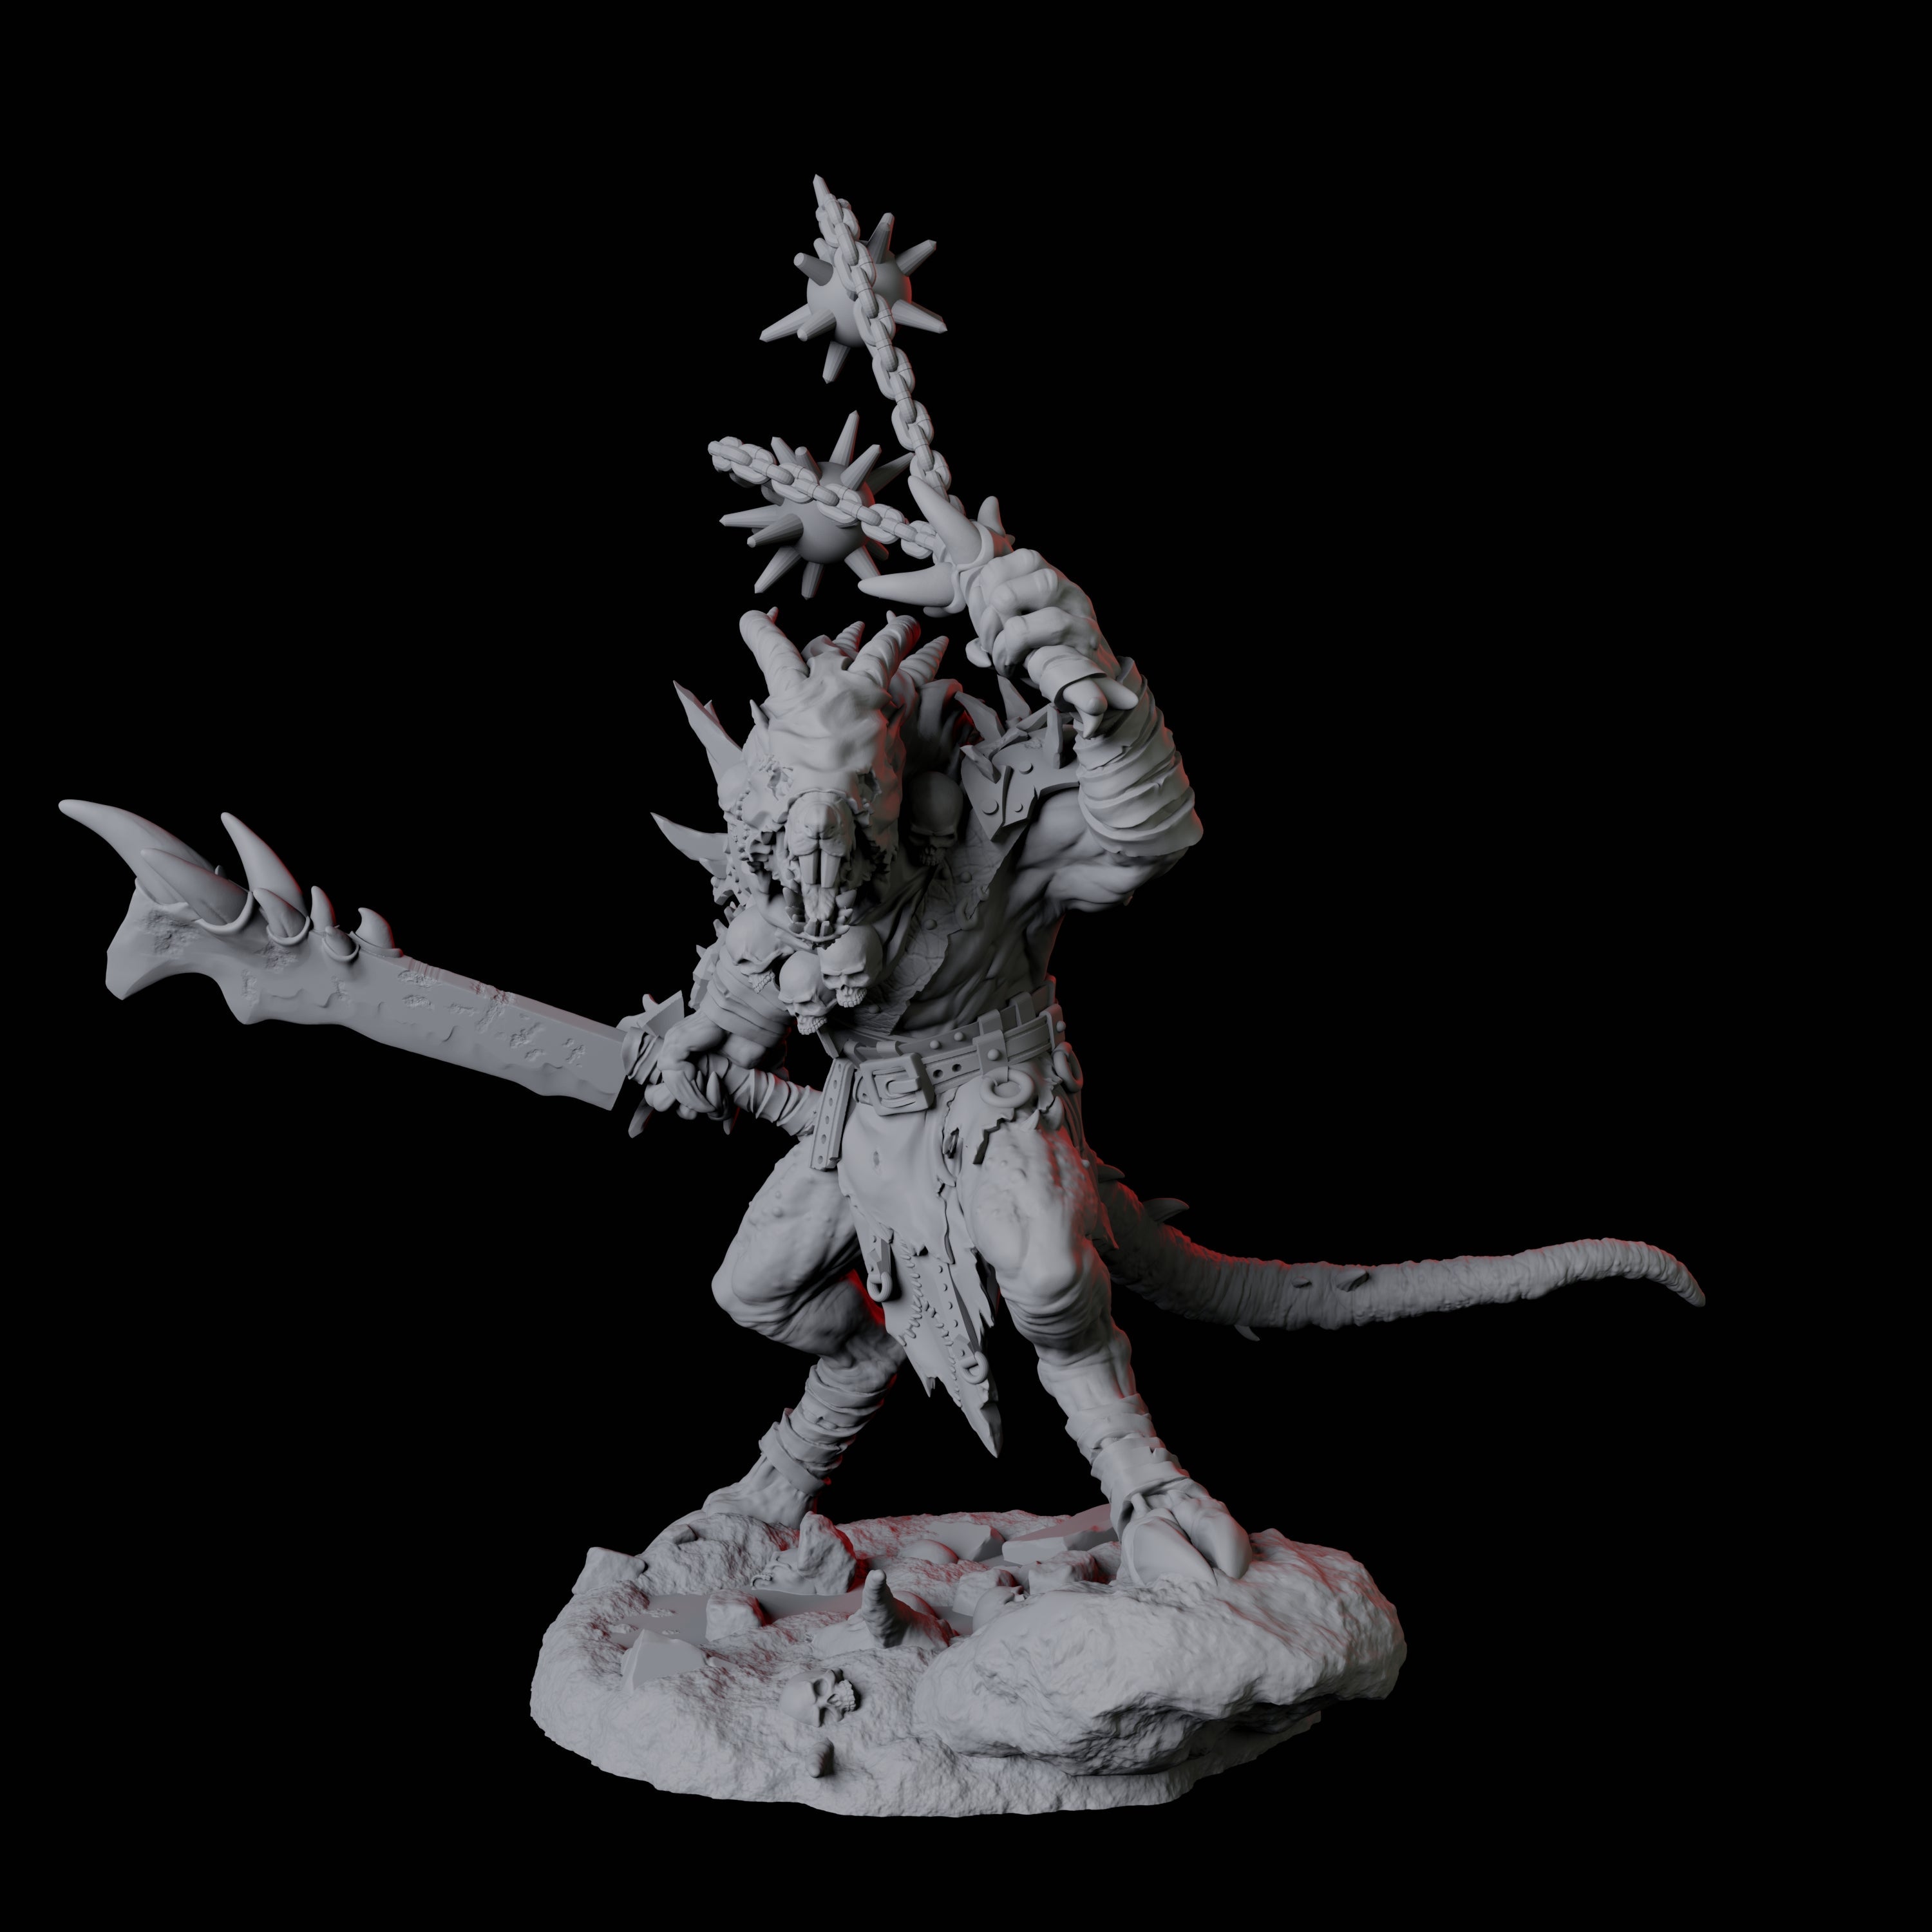 Blackfang Mutant Ratfolk C Miniature for Dungeons and Dragons, Pathfinder or other TTRPGs